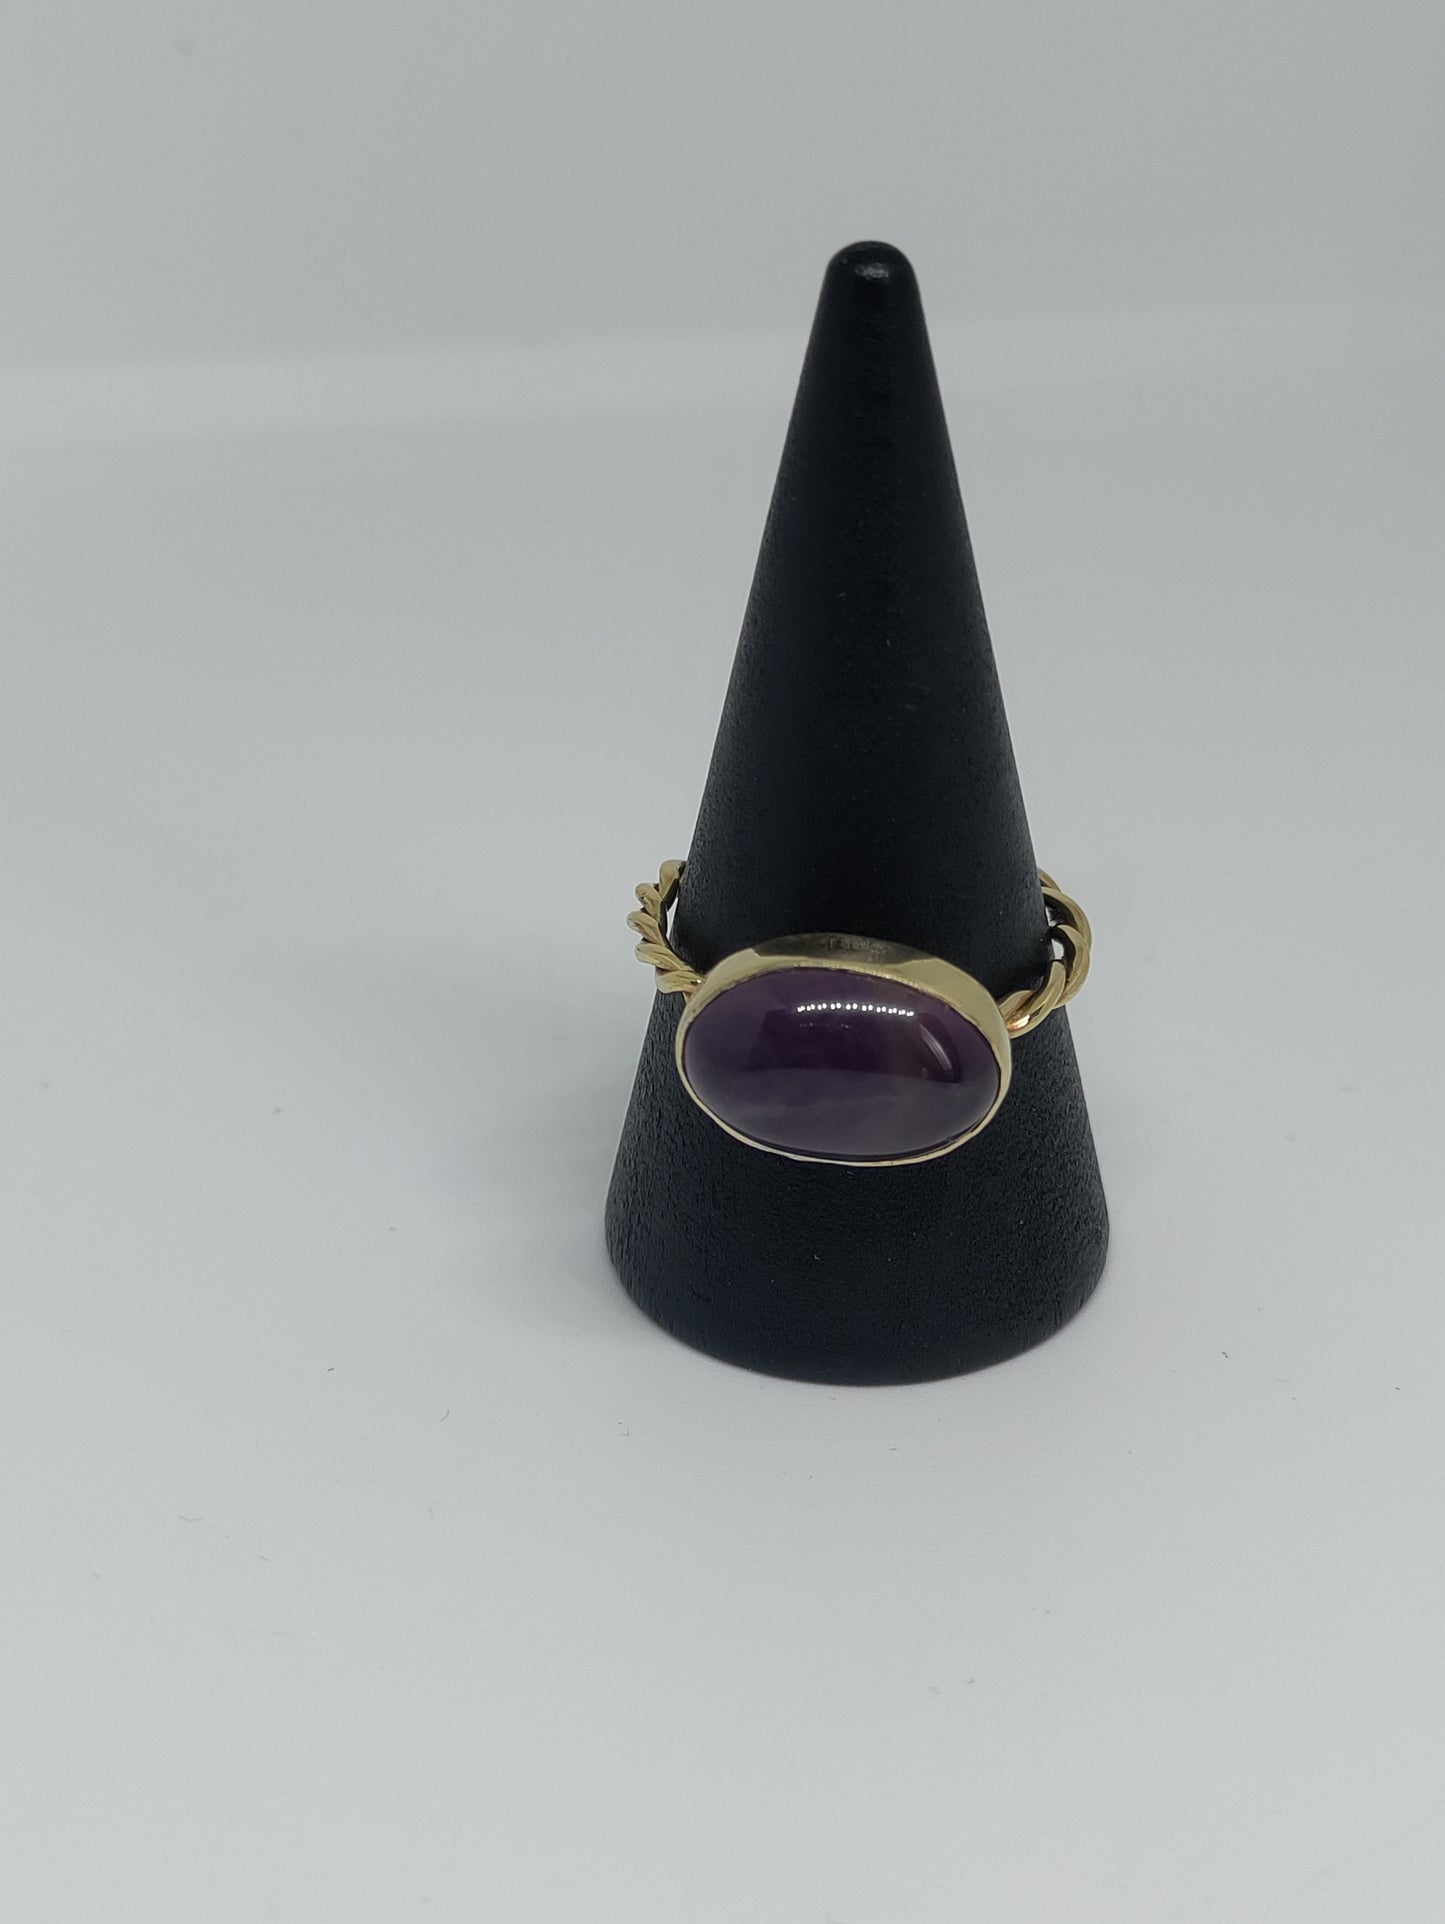 Twisted golden brass ring with purple amethyst stone LEIA&CO size 7 3/4